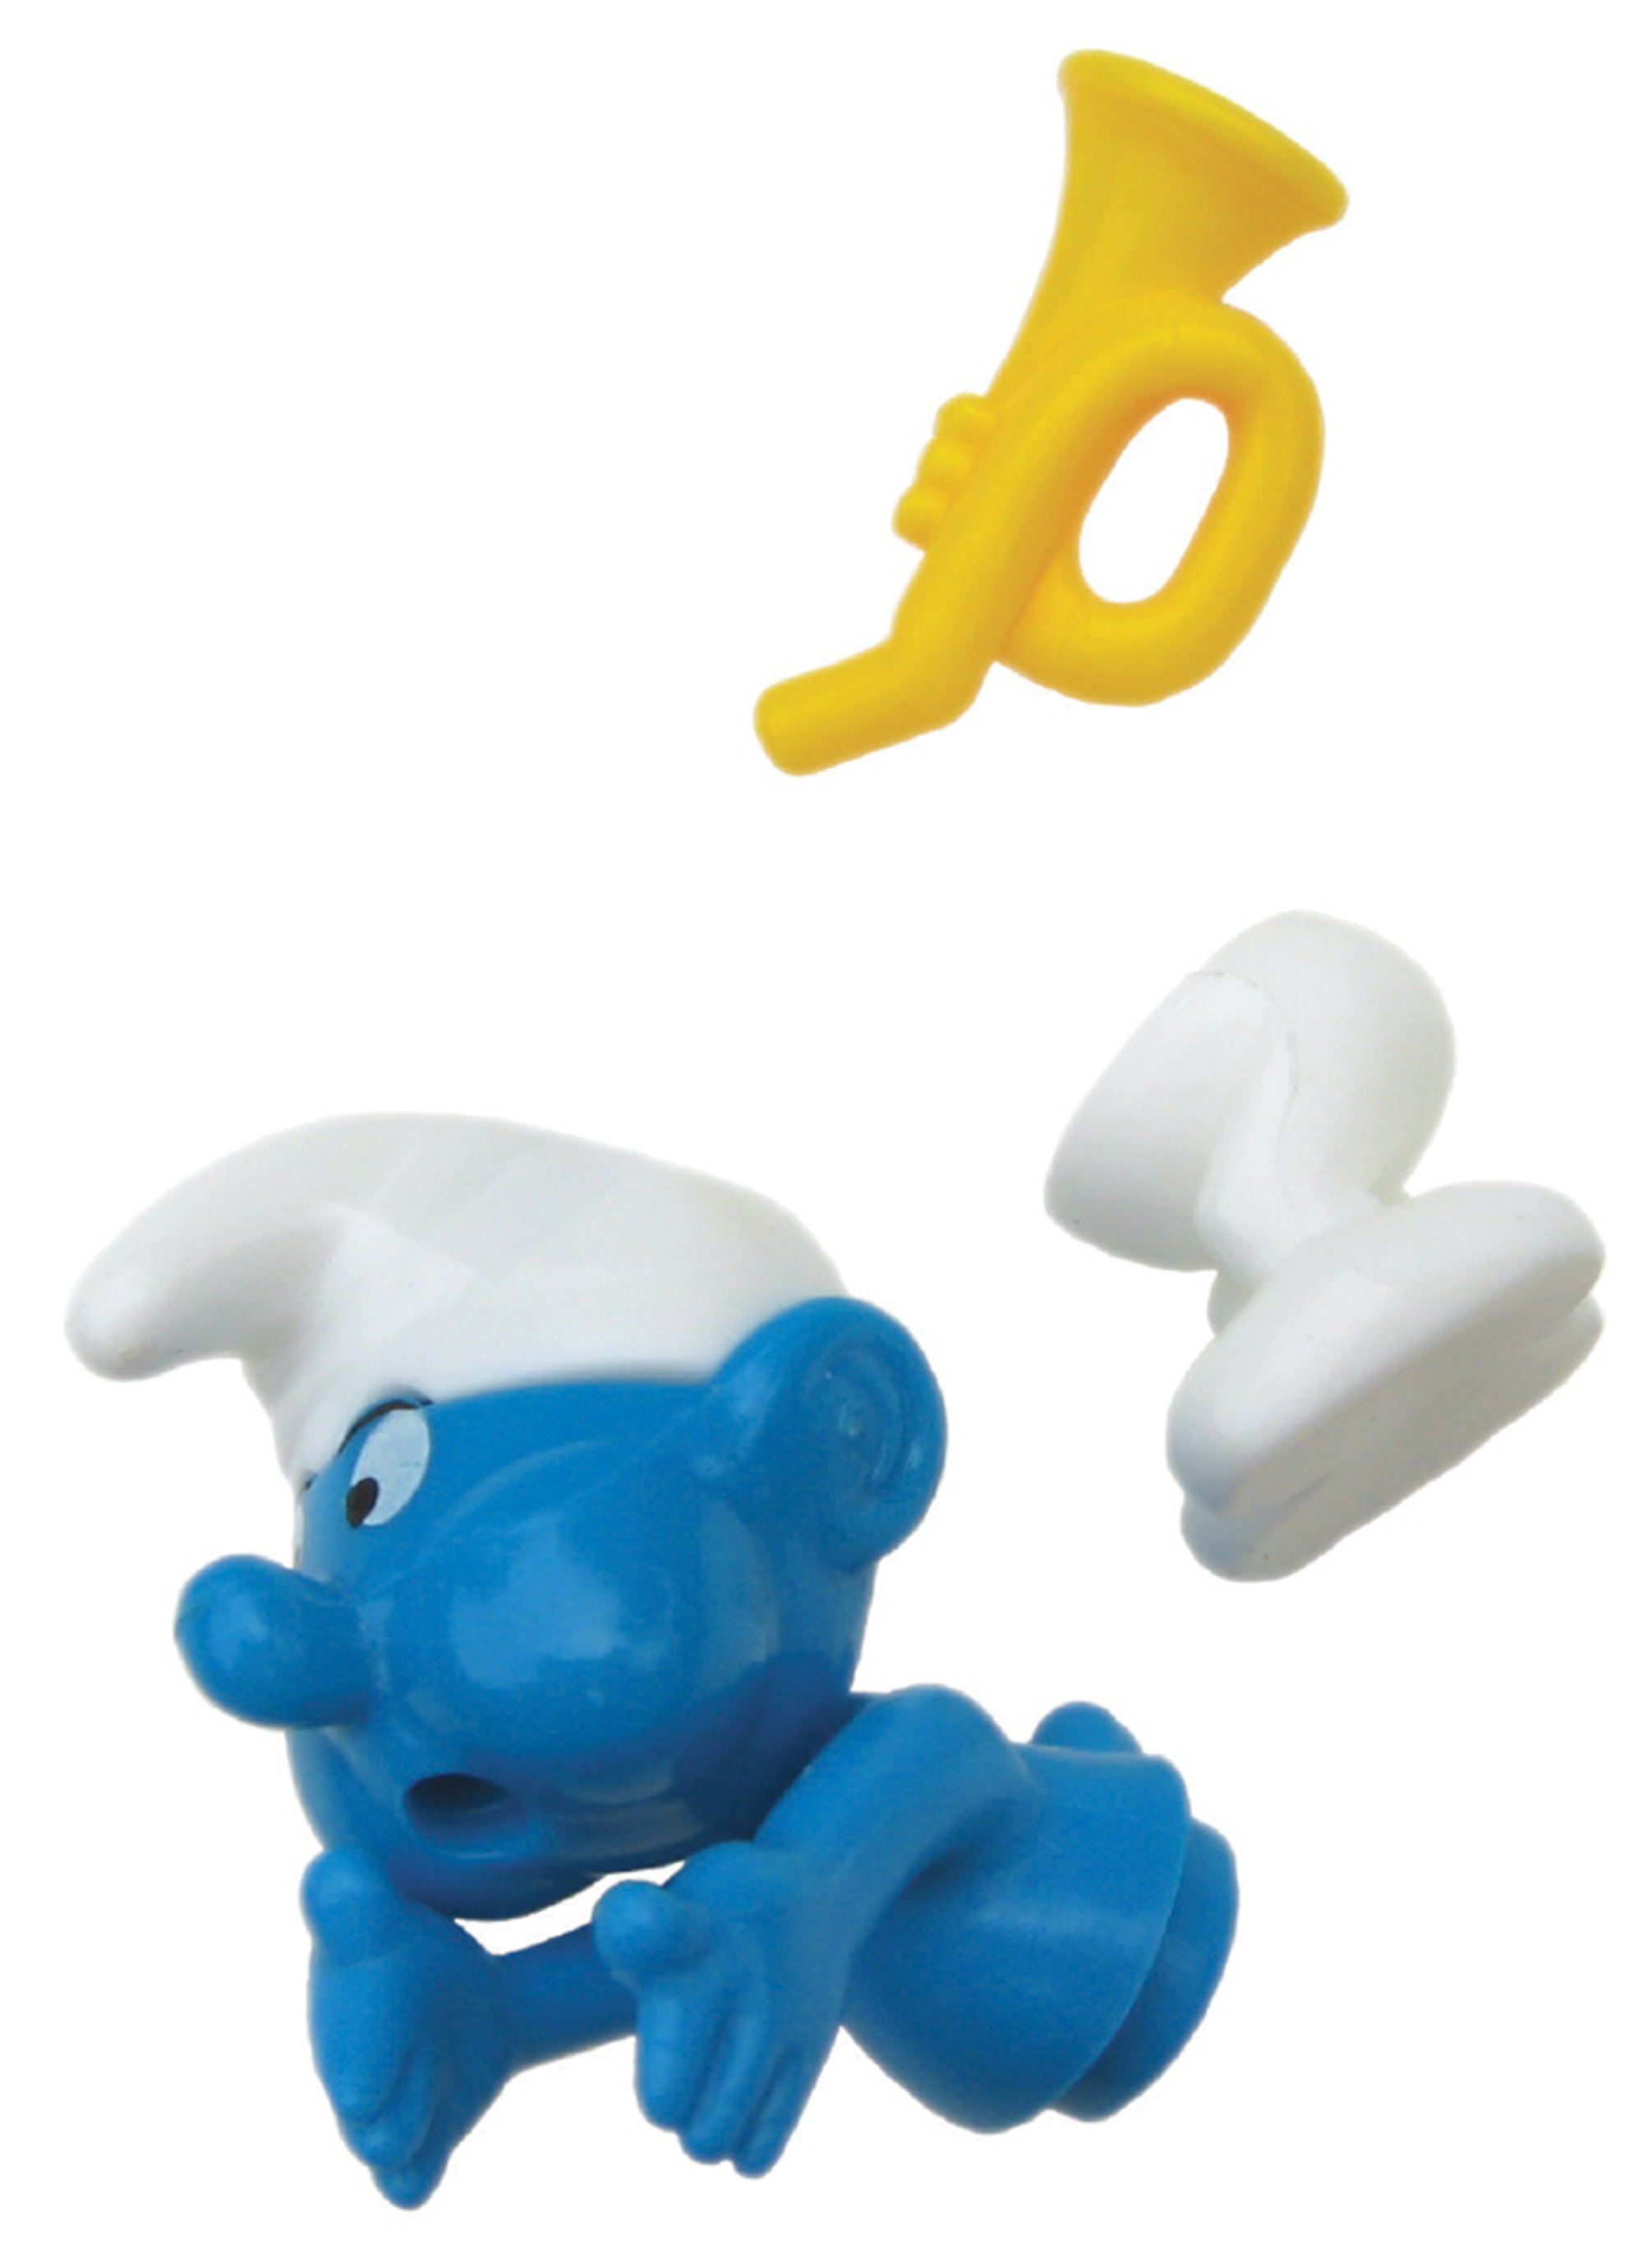 A photograph of Smurf toys that one might find inside a Kinder egg.